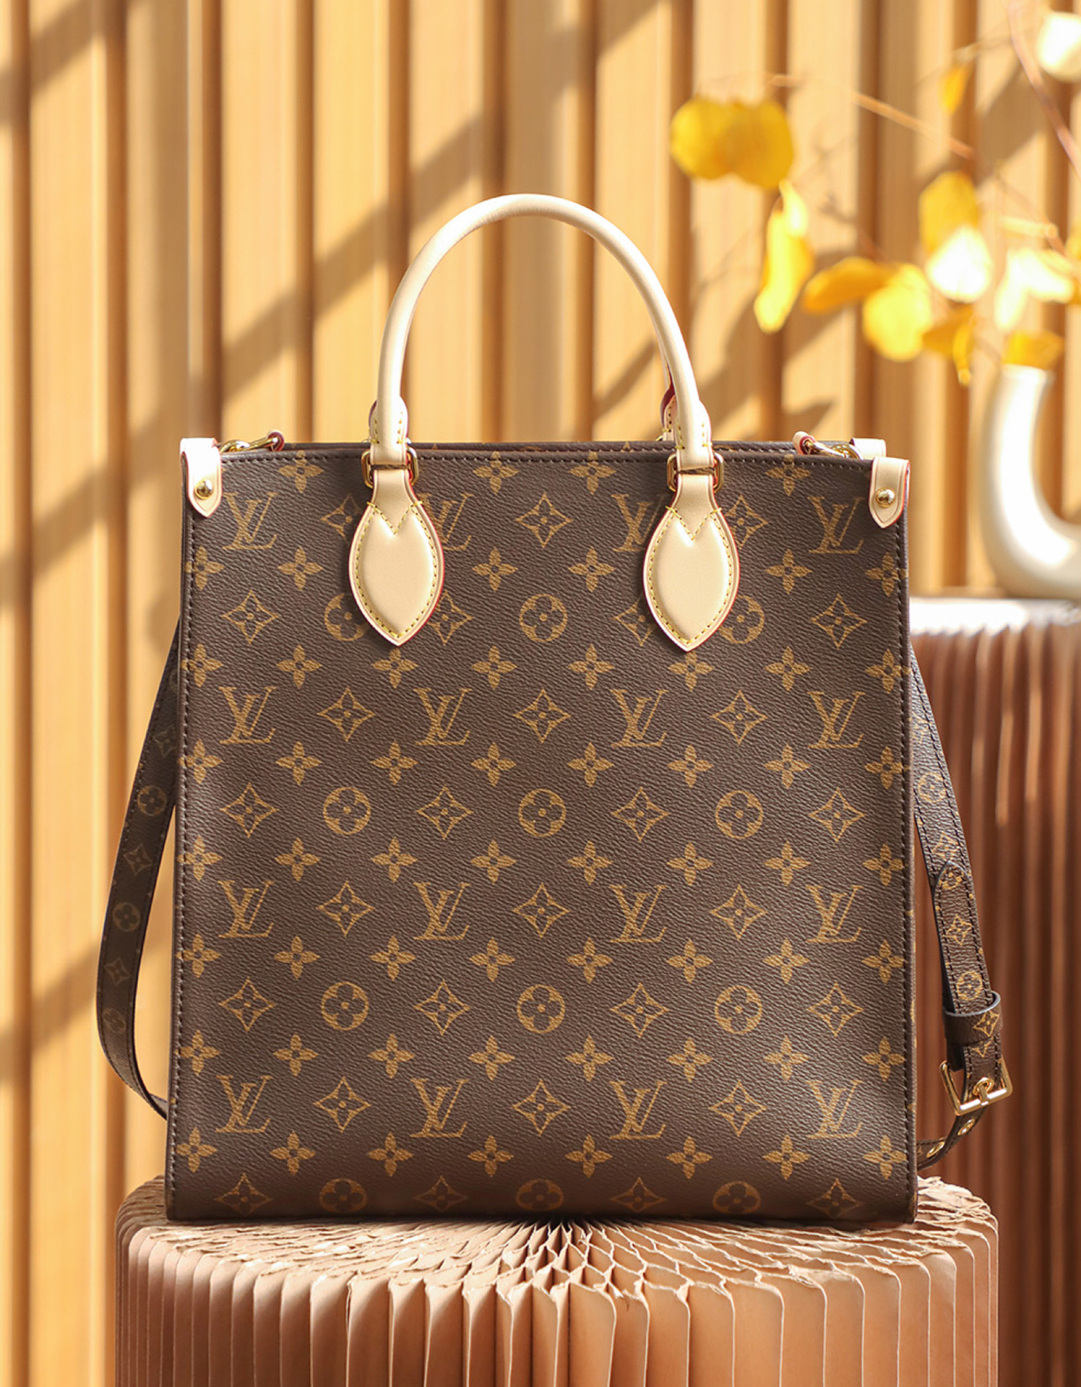 What's In My Bag!?, Louis Vuitton Speedy B 20 Rose Poudre